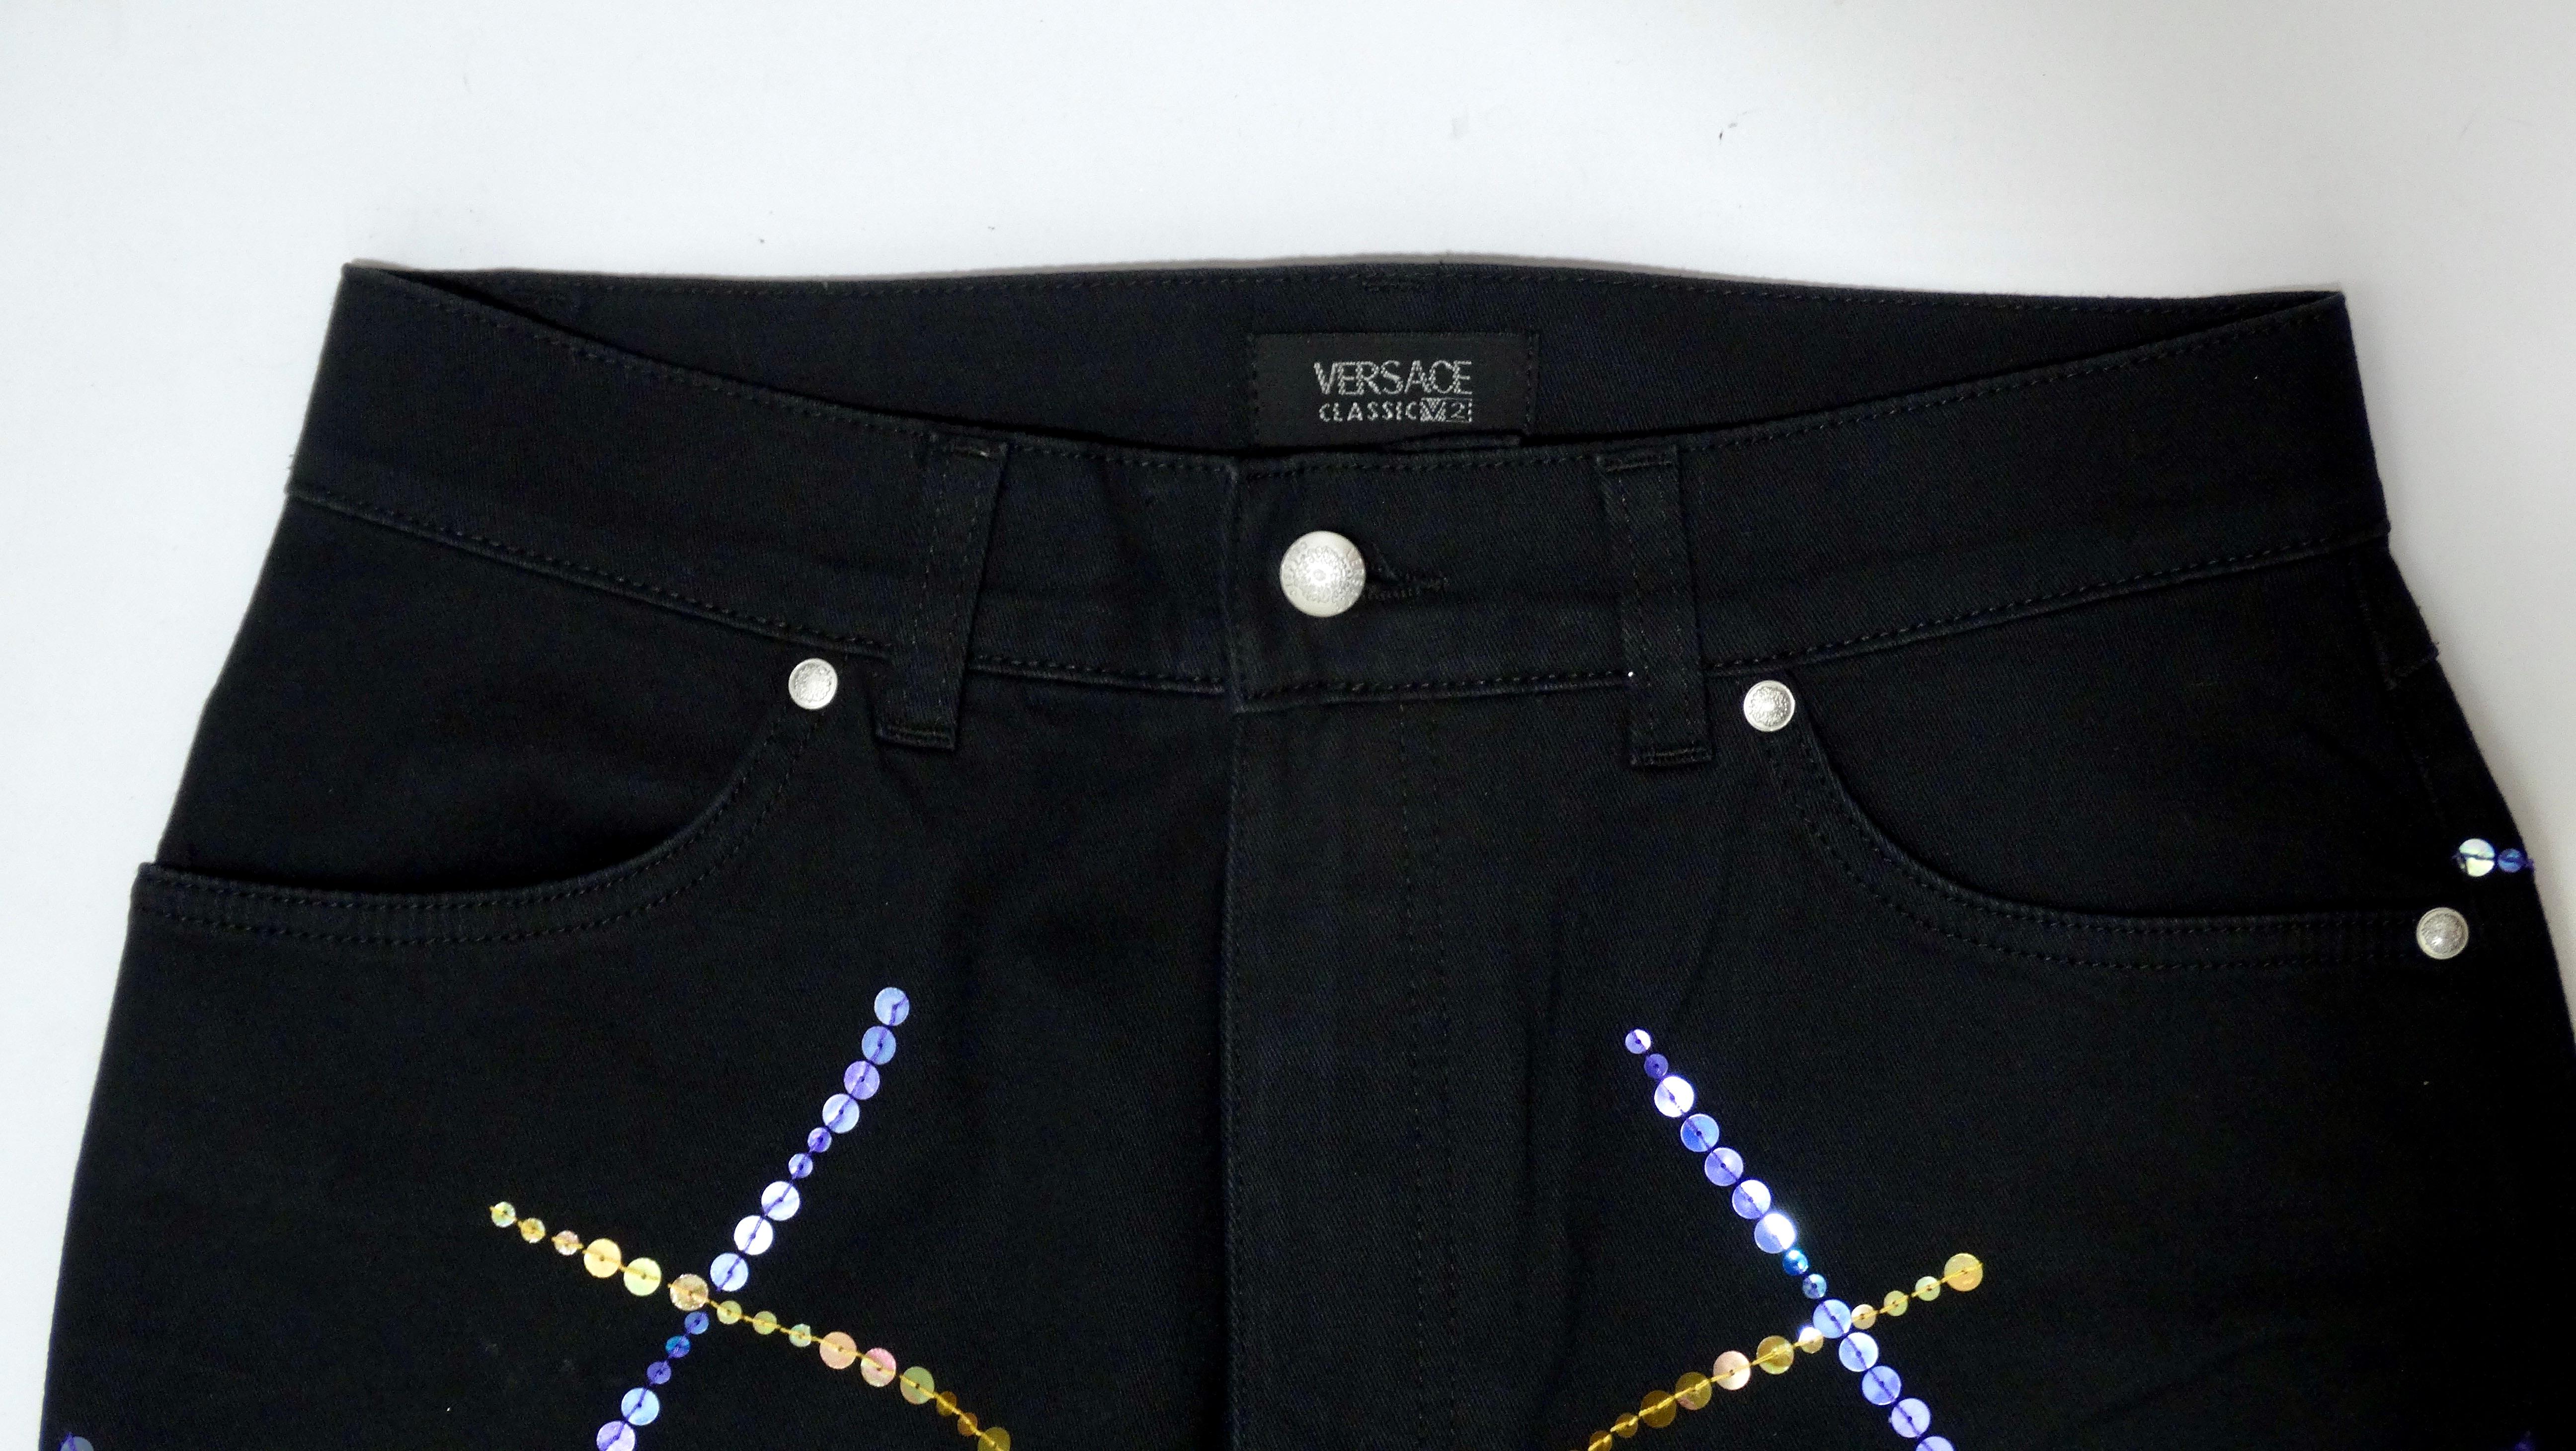 versace classic v2 jeans